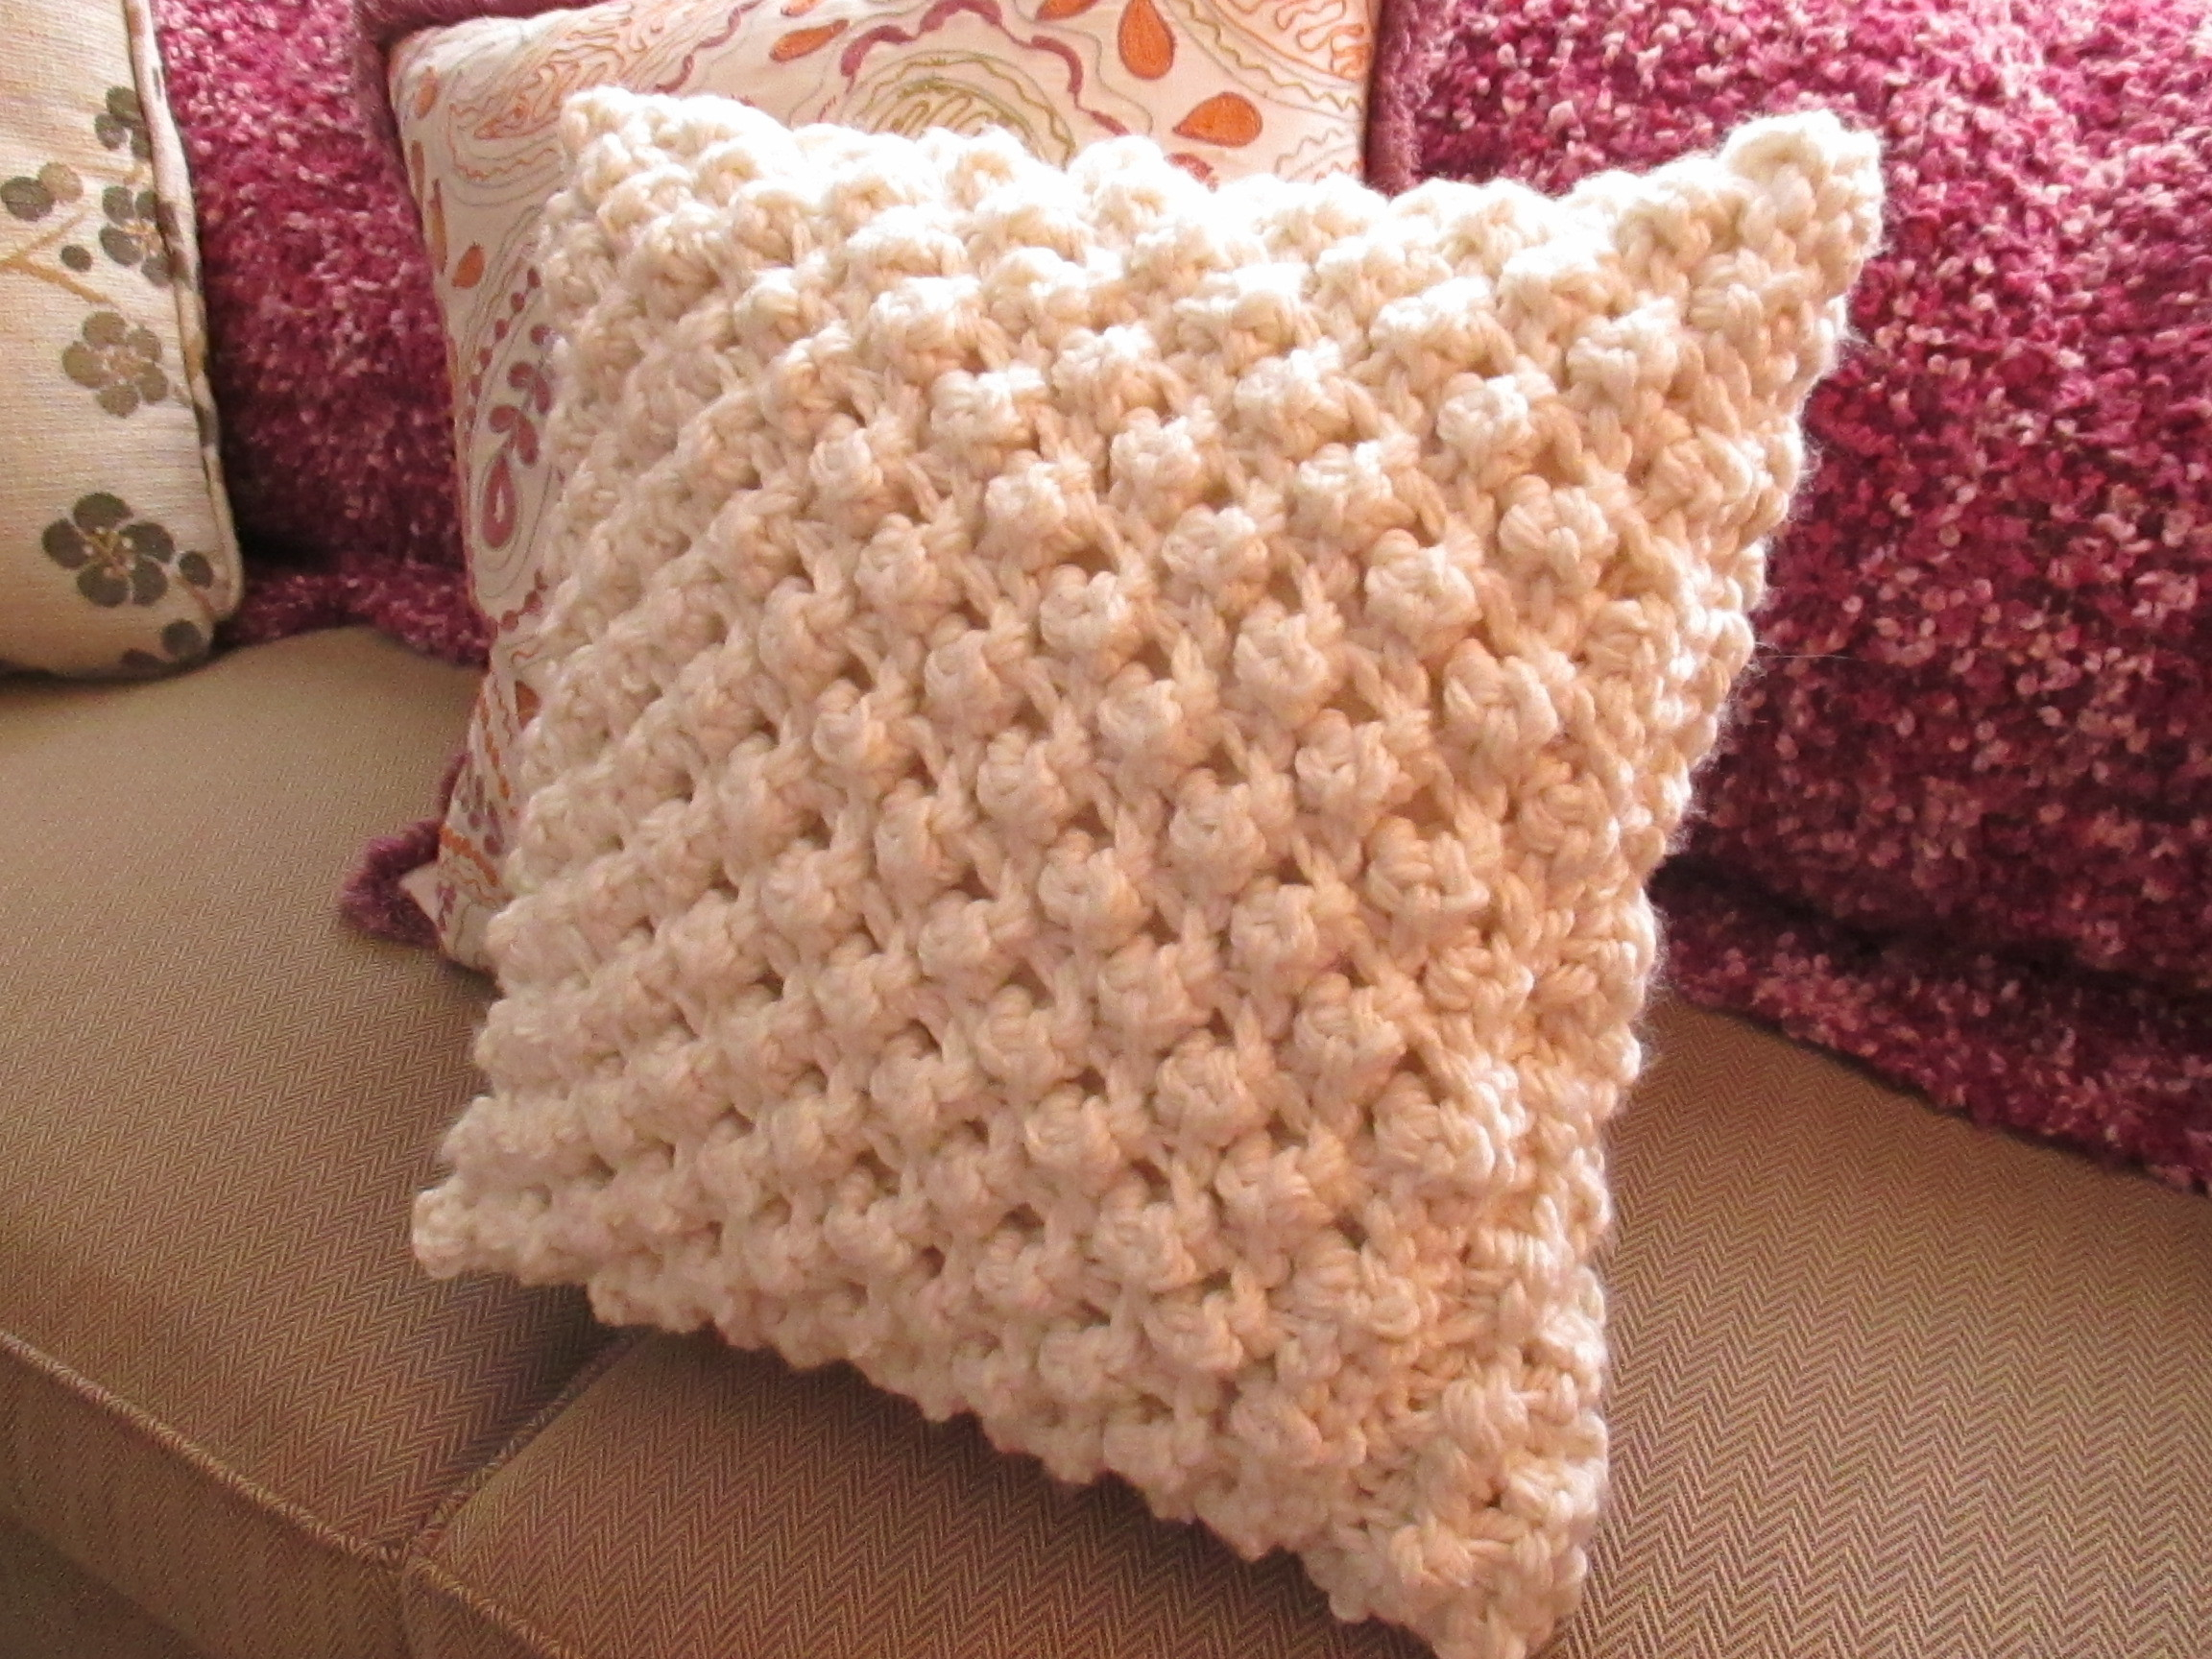 Free Cushion Knitting Patterns Popcorn Knit Pillow Cover How To Stitch A Knit Or Crochet Cushion